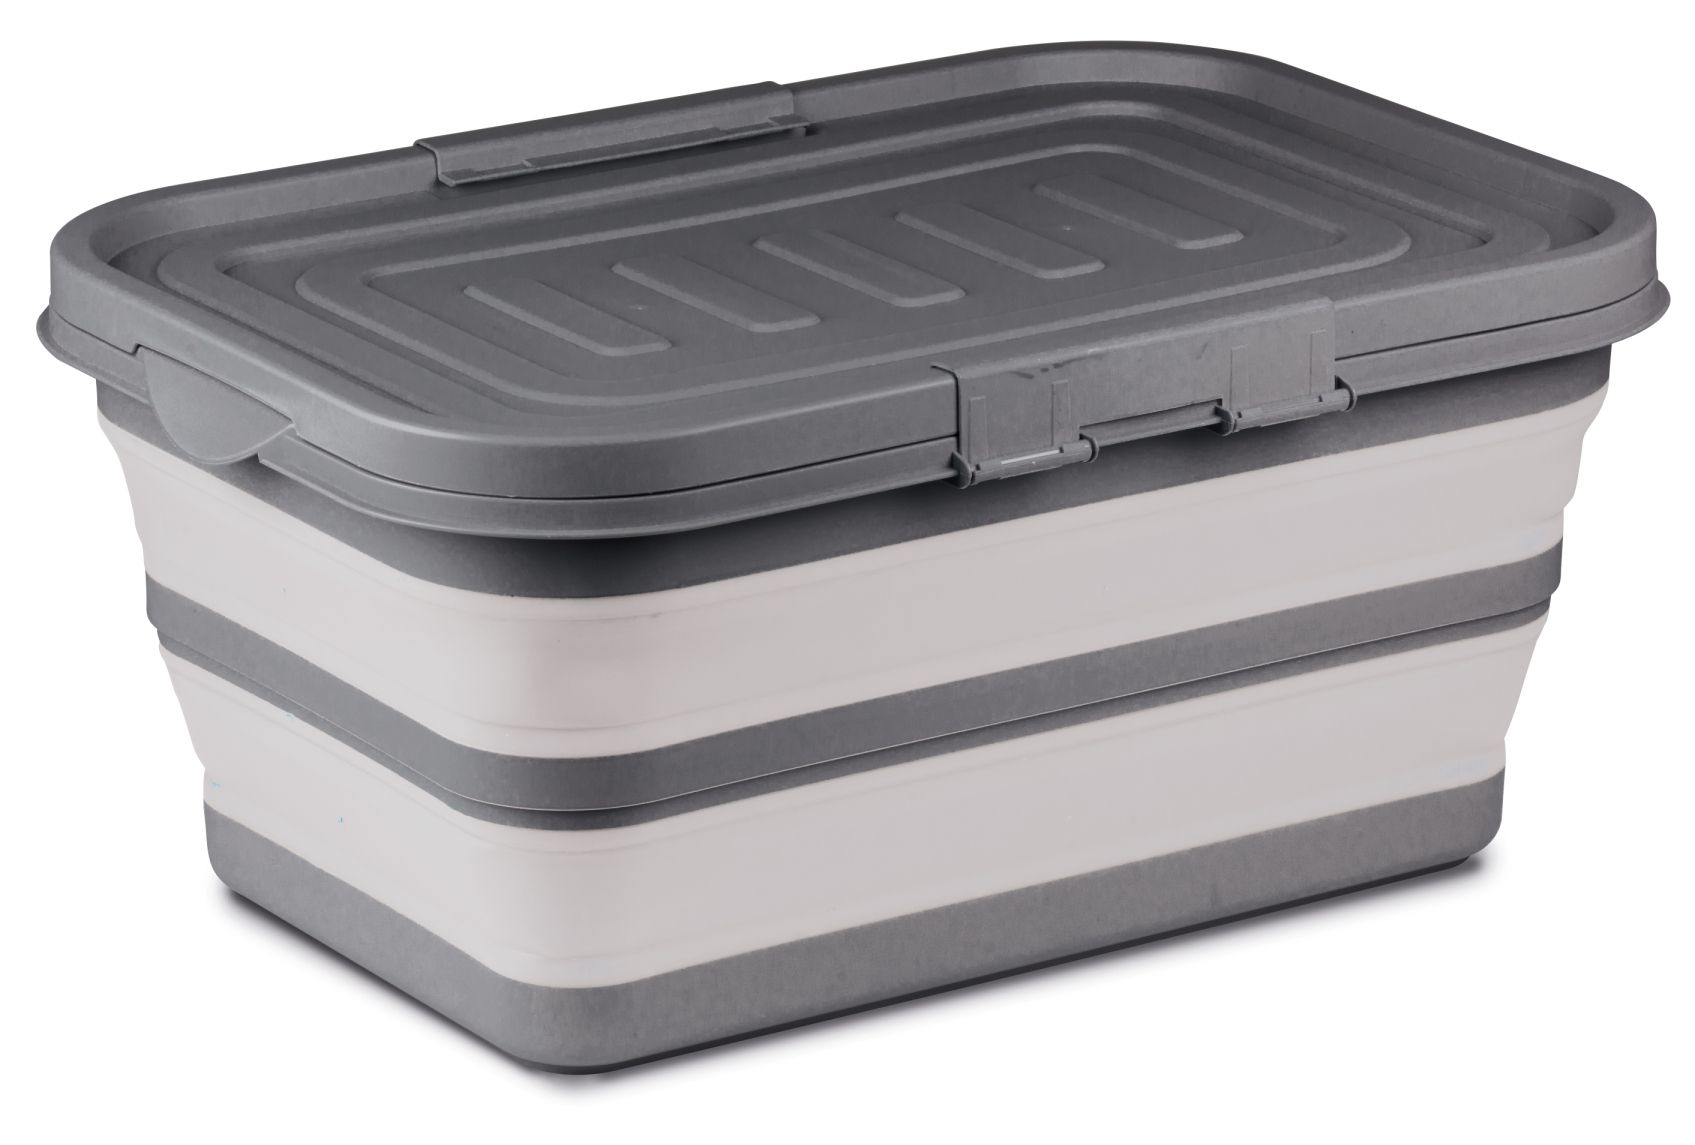 Kampa Collapsible Large Storage Box Grey With Lid 61 x 47 x 27 cm